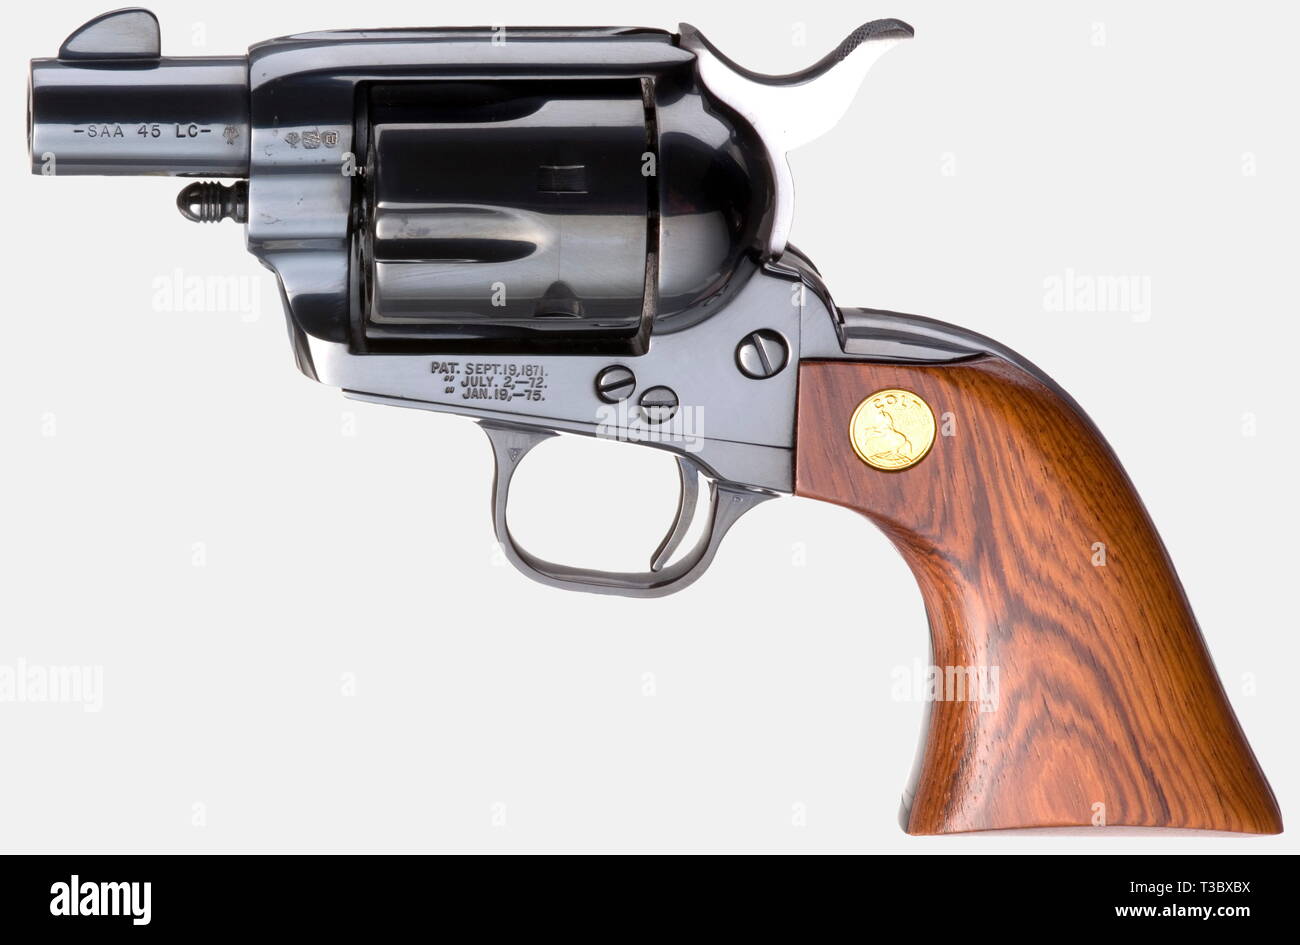 A Colt 'Sheriff's Edition'., Five Colt Single Action Army Revolvers, each without ejector. Cal..45 LC. Serial numbers: 178SE2, 178SE25, 178SE3, 178SE4, and 178SE55. Matching numbers. Manufactured in 1987. Different barrel lengths from 2' to 5.5' (the last digit of the serial number indicates the barrel length). Deep black bluing. Wooden grip panels inset with the company logo. In a glazed display case, lined with green velvet. The weapons are grouped around a plaque in the shape of a sheriff's star. The glass panel has gold lettering, 'Sheriff's , Additional-Rights-Clearance-Info-Not-Available Stock Photo